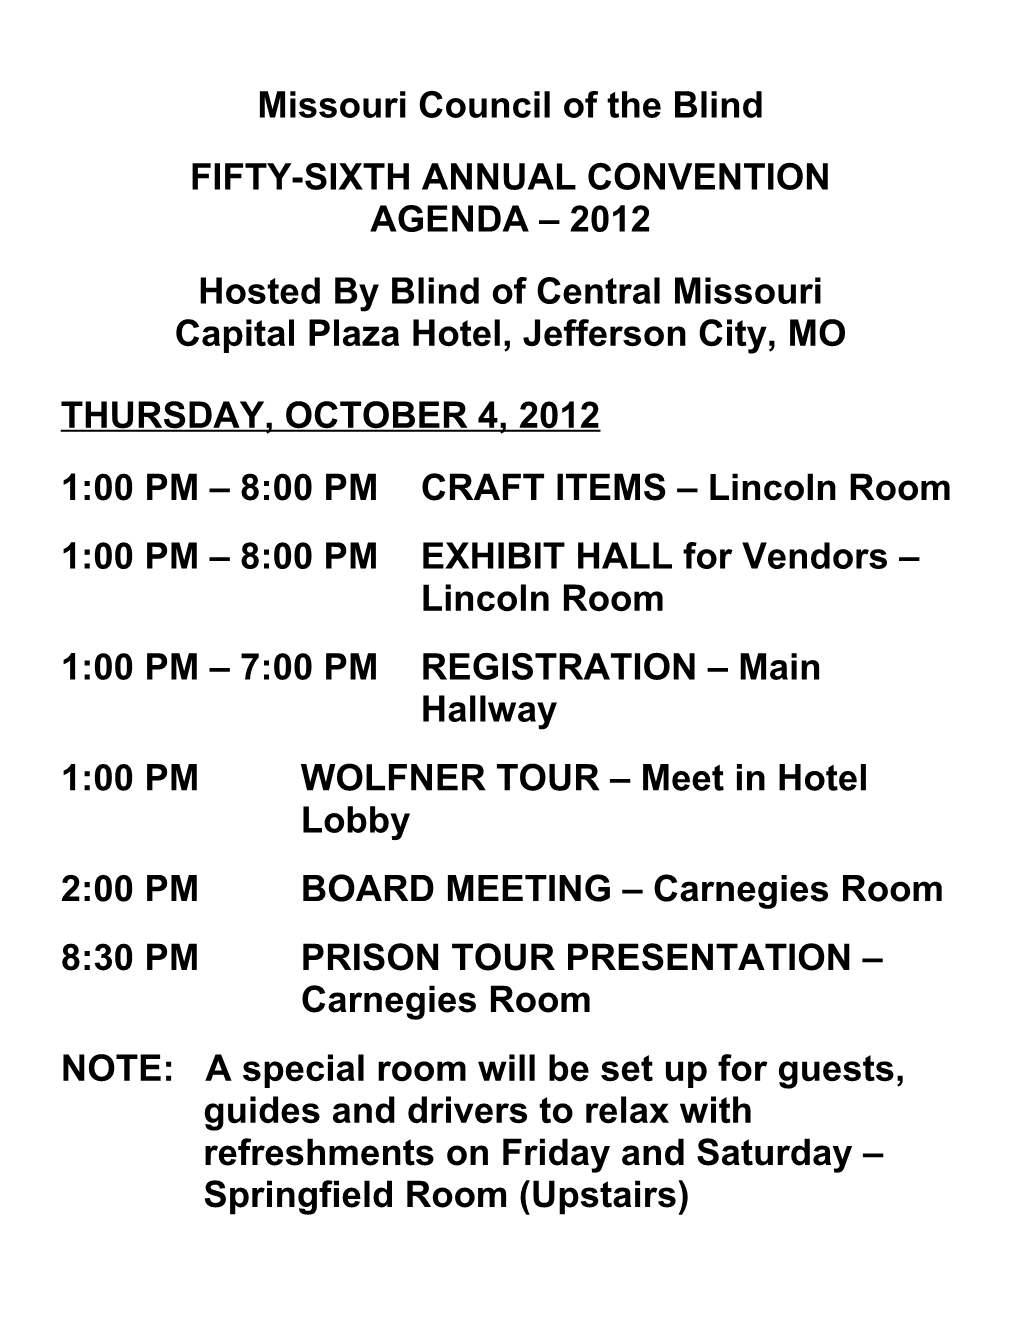 Fifty-Sixth Annual Convention